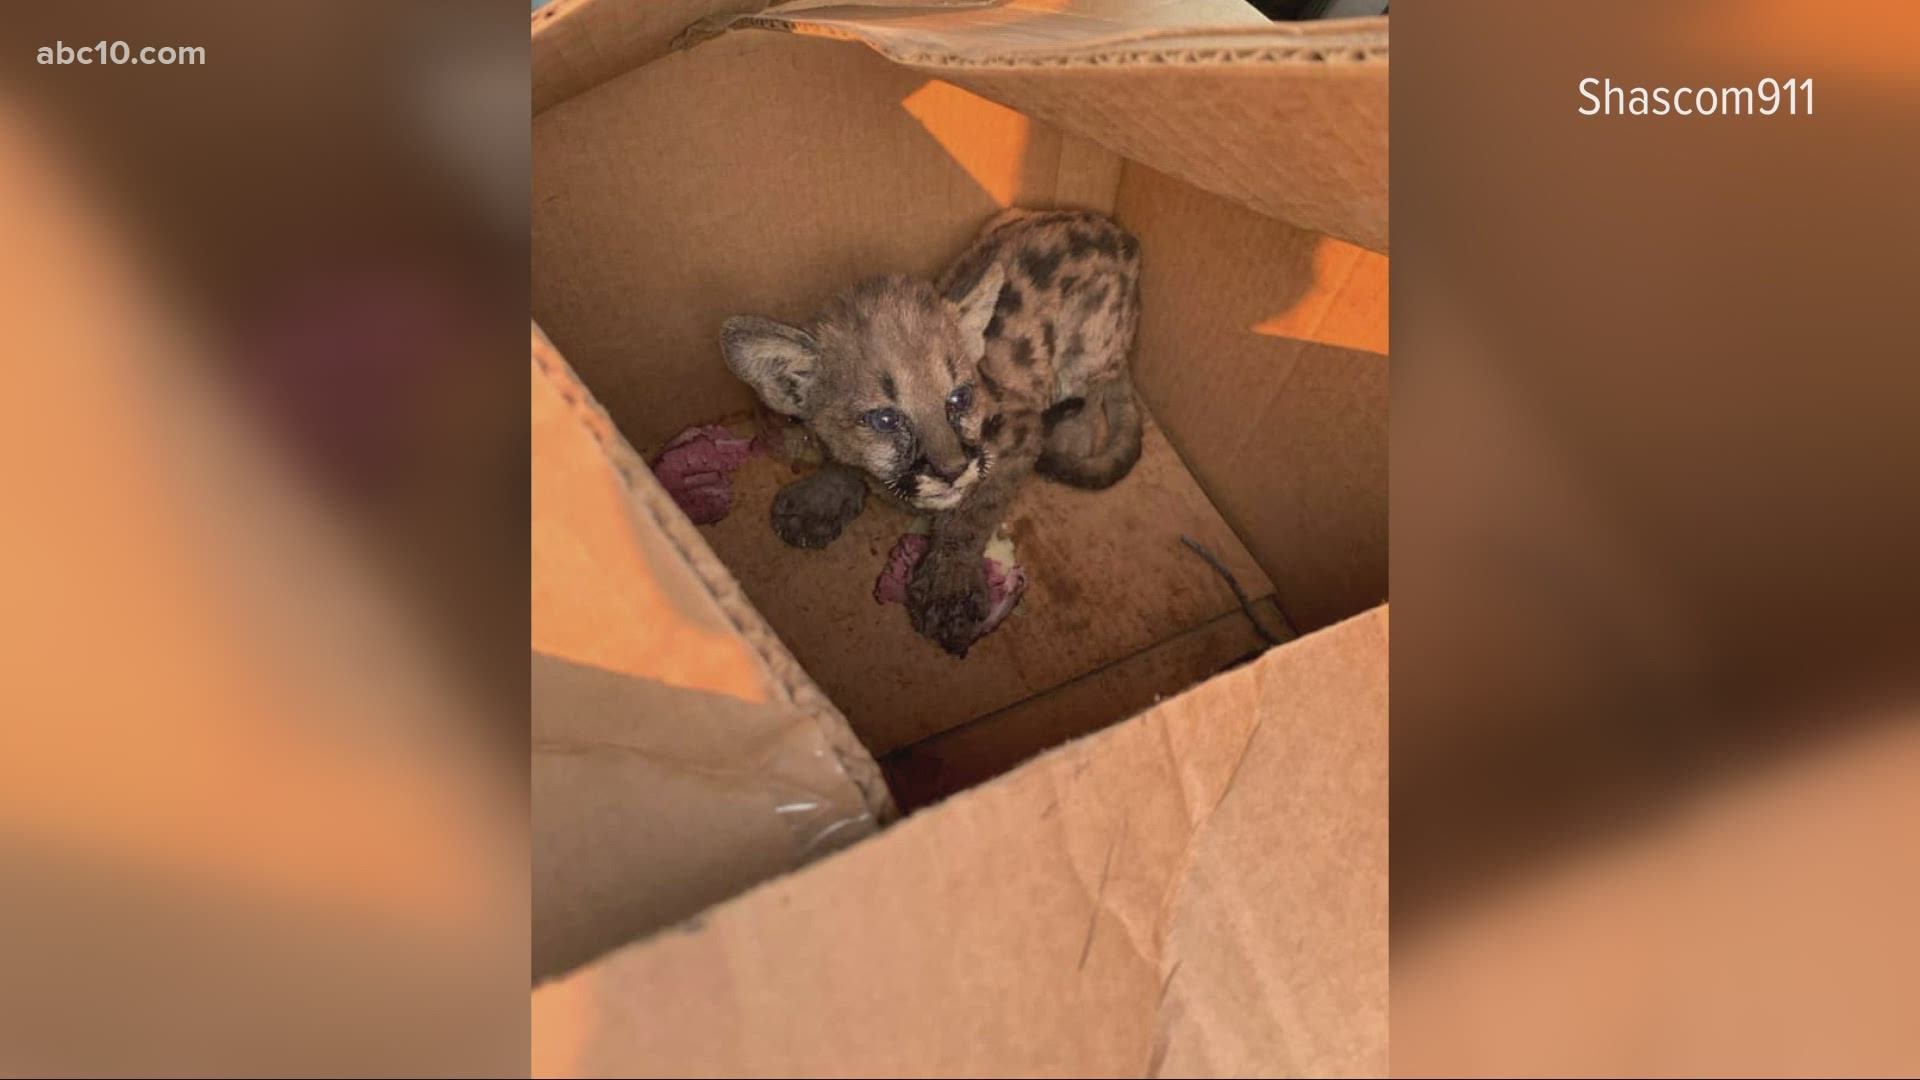 Firefighter rescues mountain lion cub from the Zogg Fire in Shashta County.